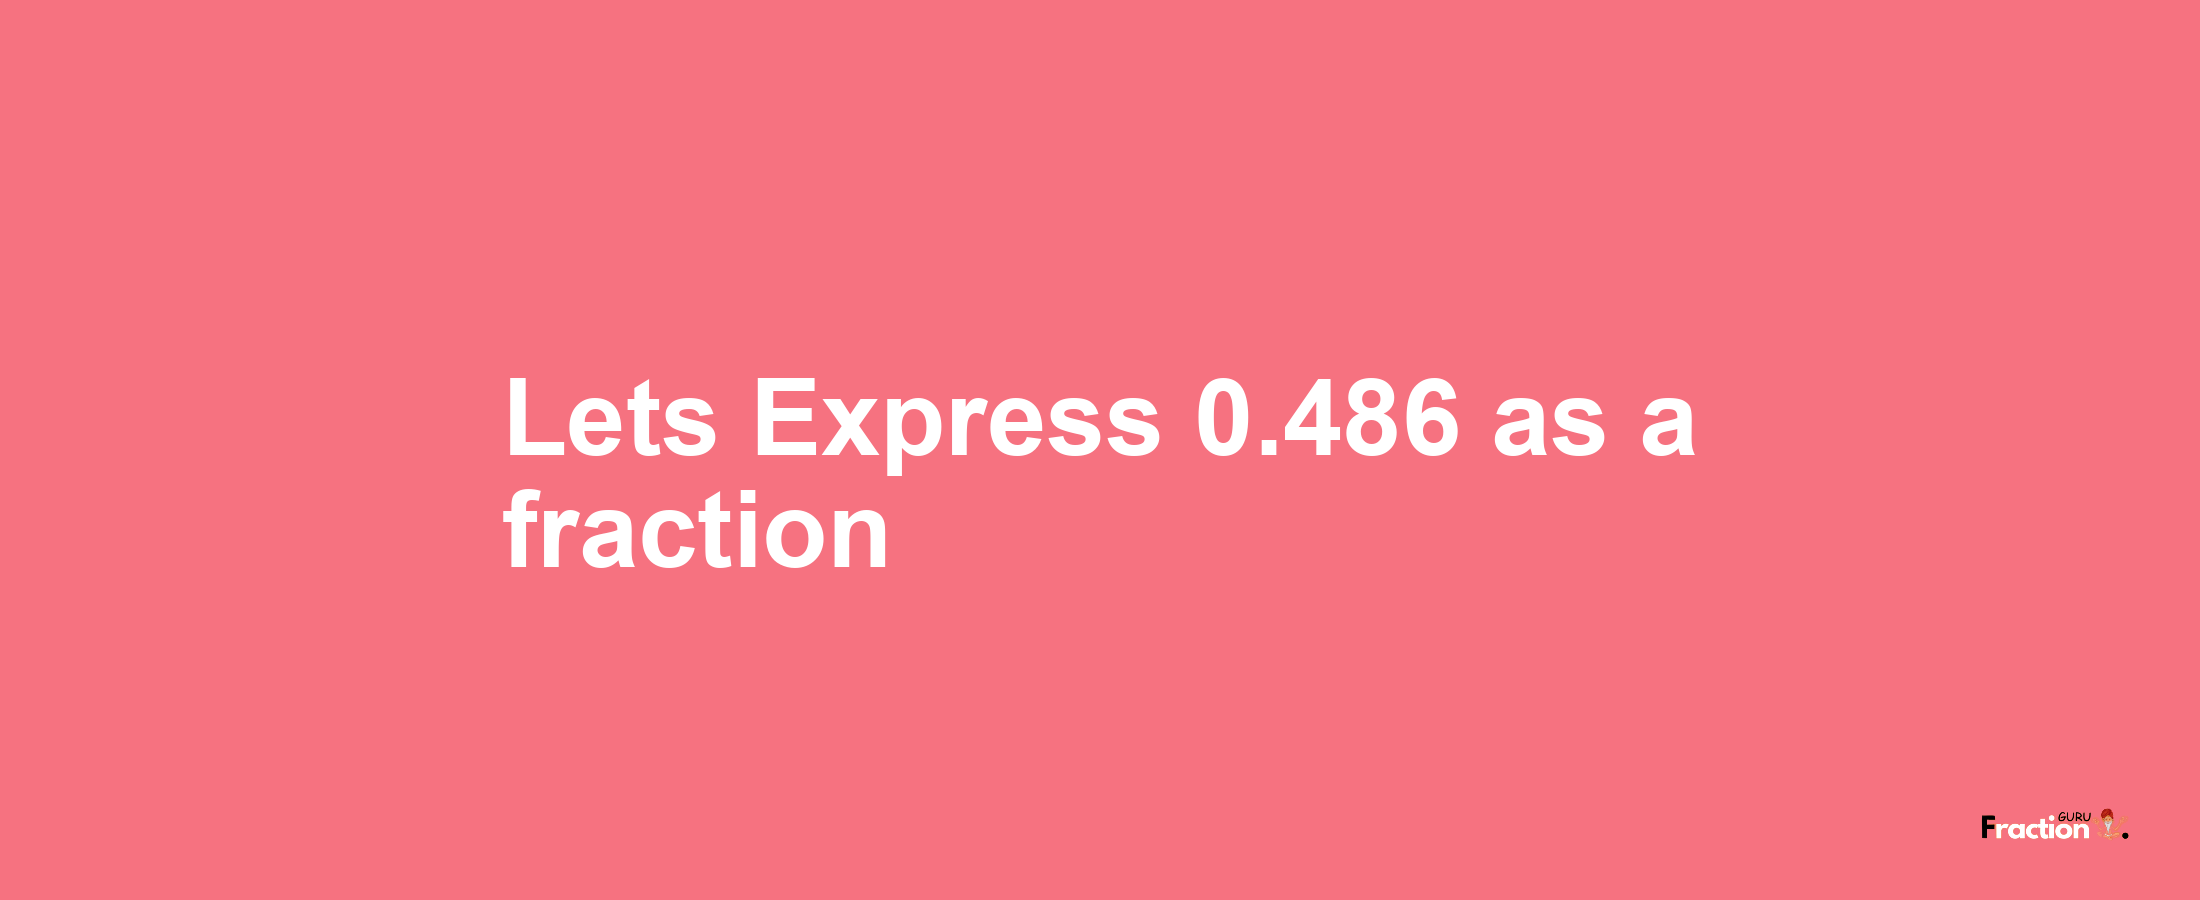 Lets Express 0.486 as afraction